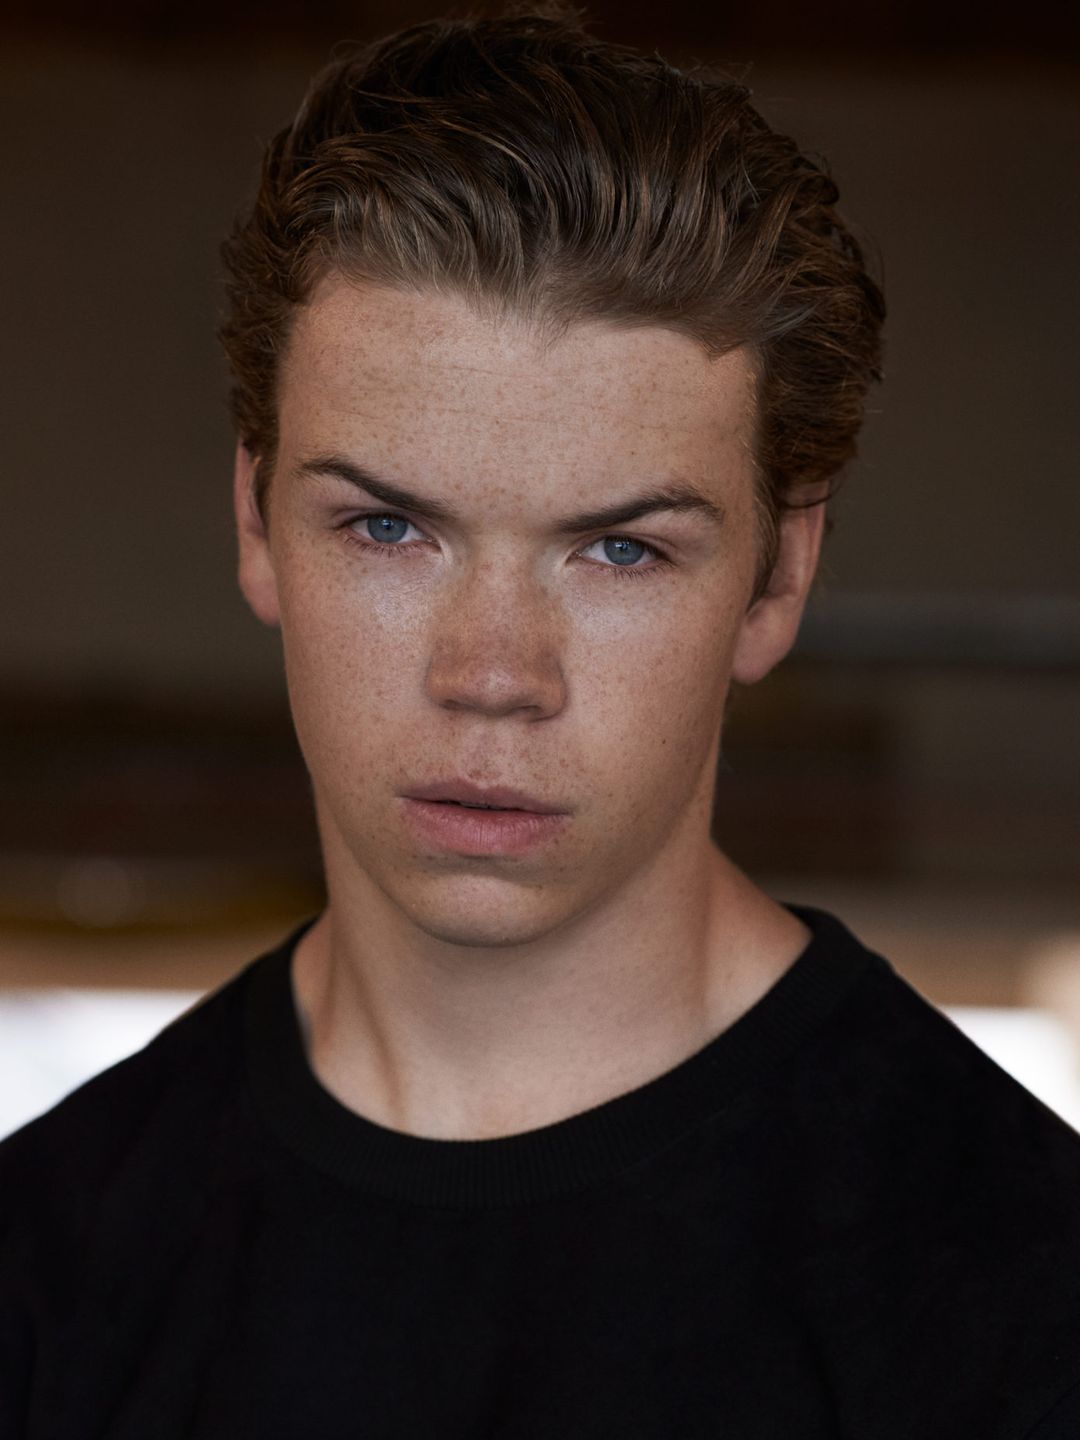 Will Poulter biography